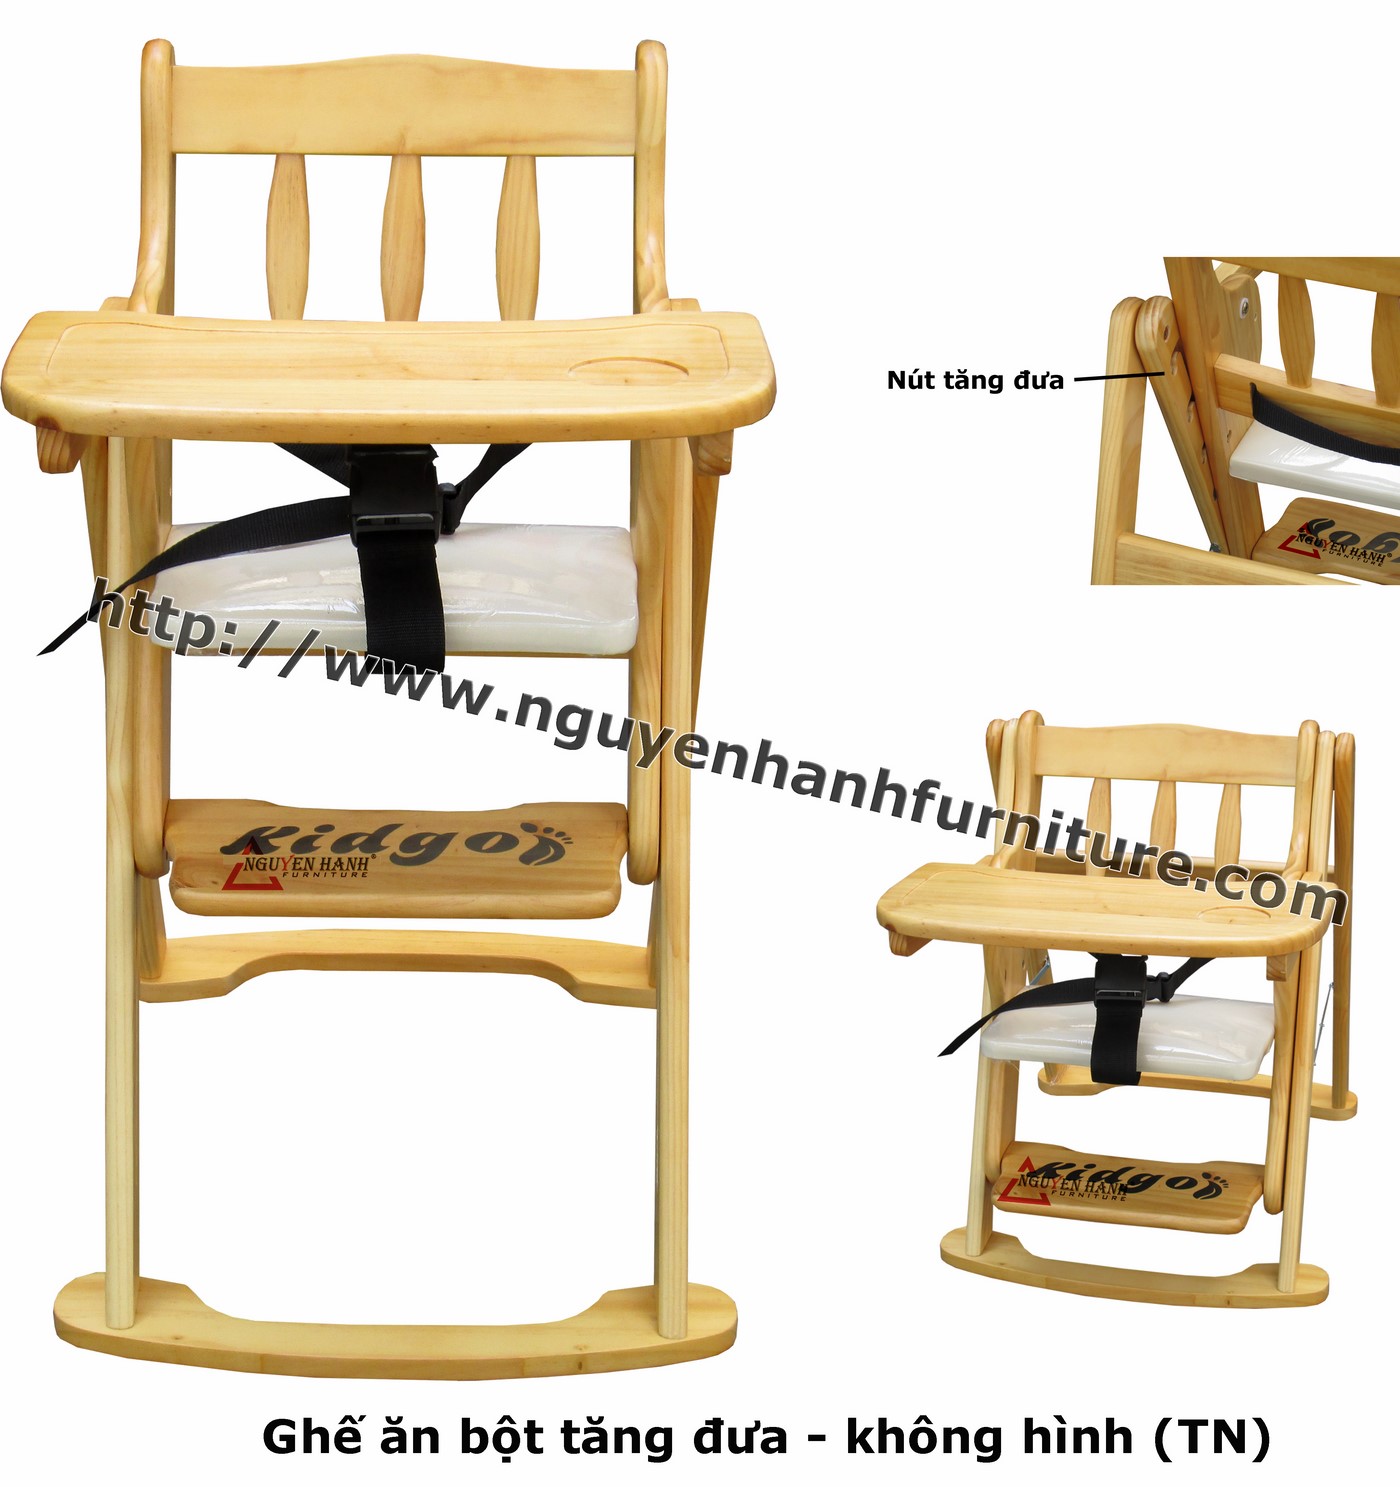 Name product: baby chair (TN) - Dimensions:- Description: Wood natural rubber